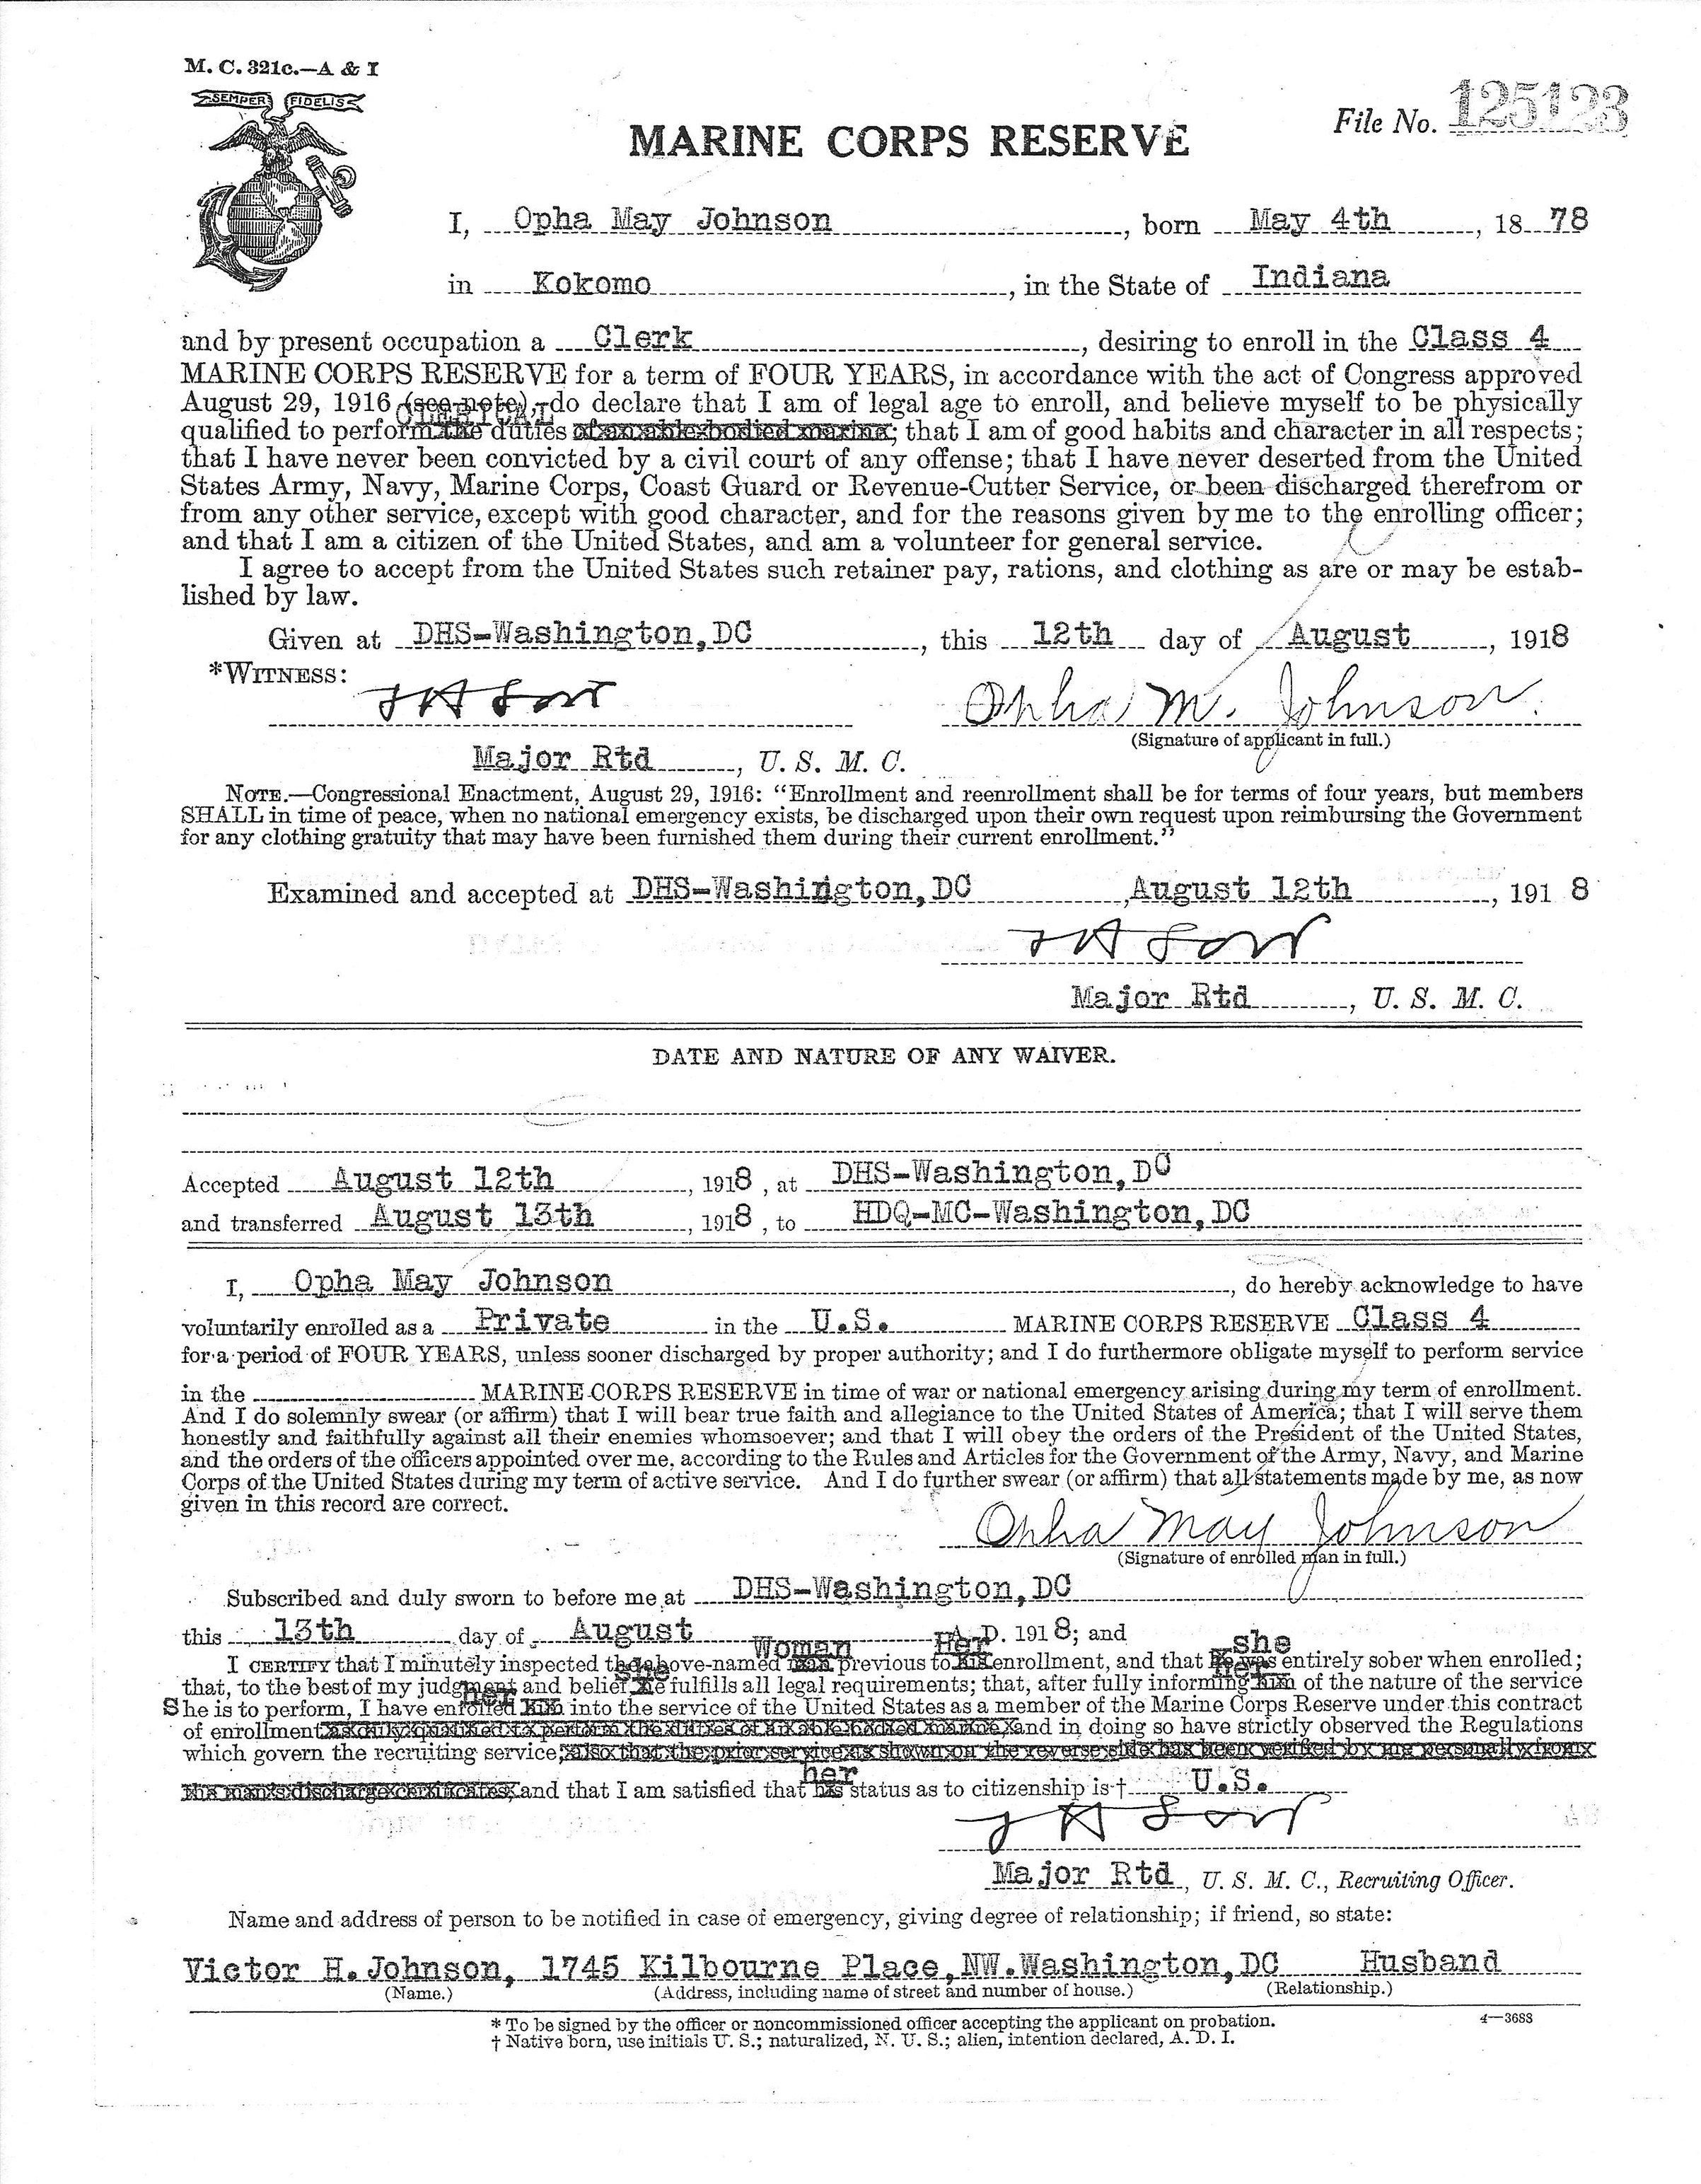 The document that Opha May Johnson signed on Aug. 13, 1918, making her the first woman to enlist in the United States Marine Corps. (Courtesy of the Women Marines Association)